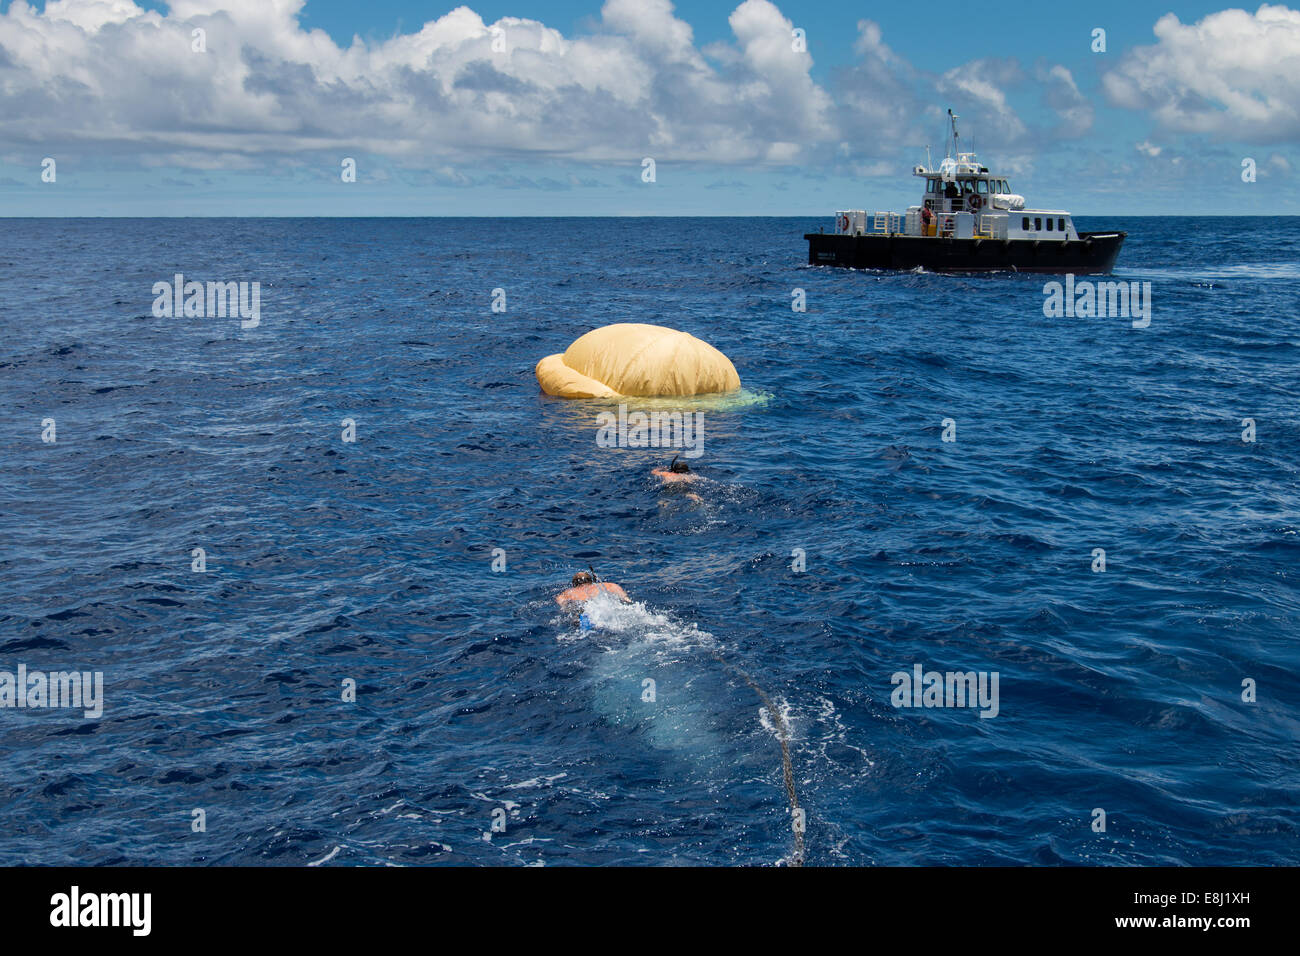 In this image: Two members of the Navy's Explosive Ordinance Disposal team swim towards the pilot ballute (a combination balloon Stock Photo